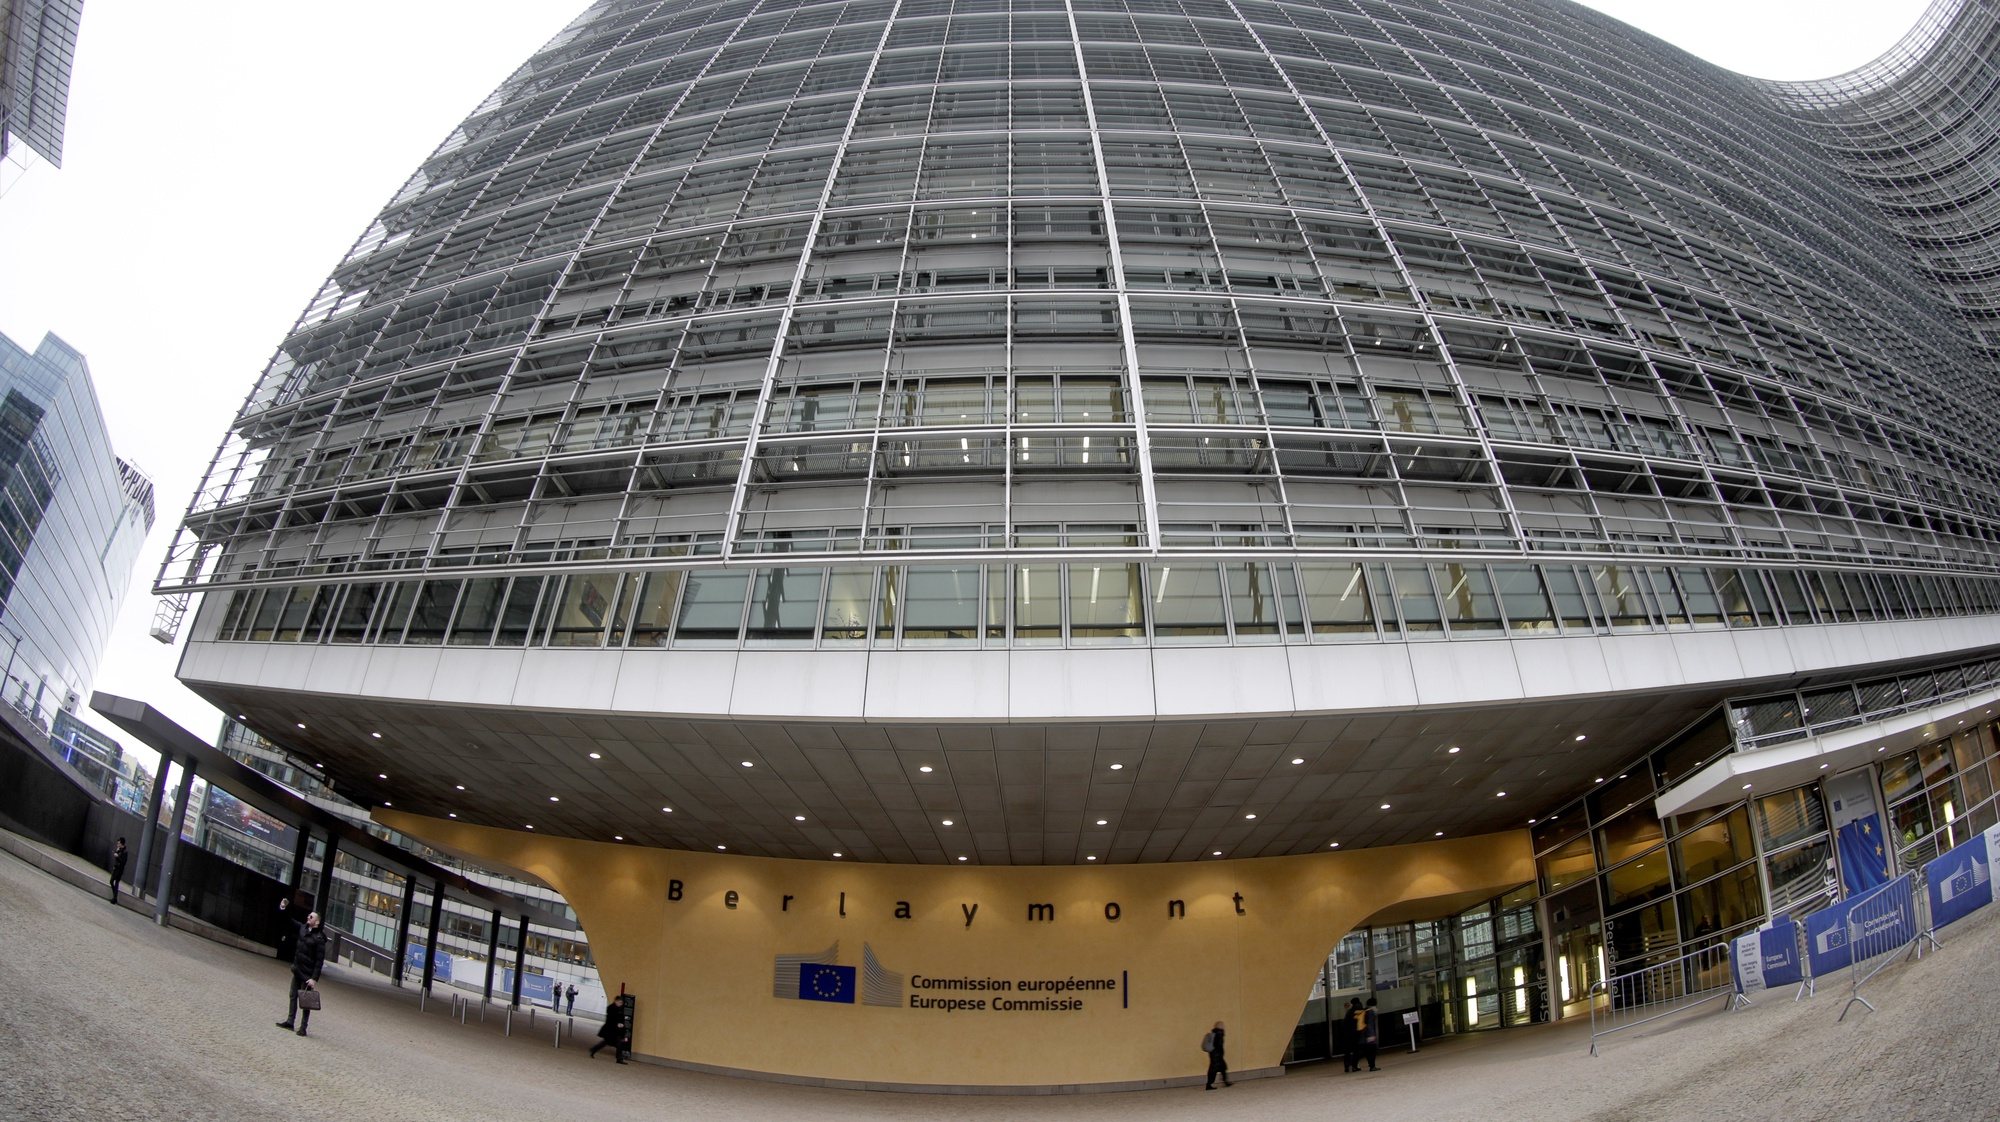 epa08026182 A photo taken with a fisheye lens shows the European Commission headquarters in Brussels, Belgium, 26 November 2019. President-Elect of the European Commission Ursula von der Leyen on 27 November 2019 will present her team of Commissioners-designate and the new Commission&#039;s programme to the European Parliament in Strasbourg, France. Members of the European Parliament (MEPs) will then discuss and decide (by simple majority) whether to elect the College of Commissioners or not.  EPA/OLIVIER HOSLET